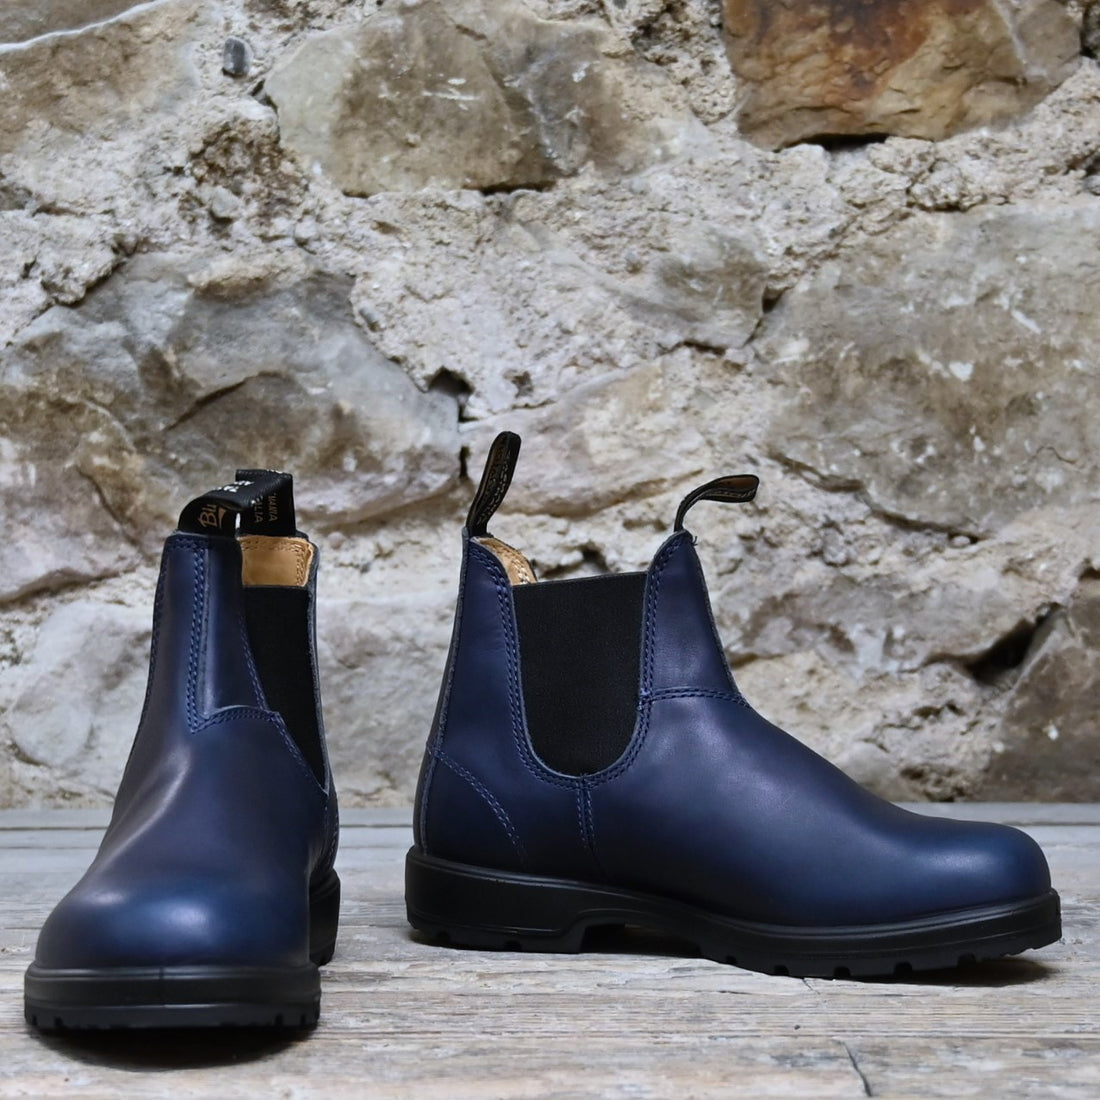 Blundstone Classic Chelsea in Navy view of front and side